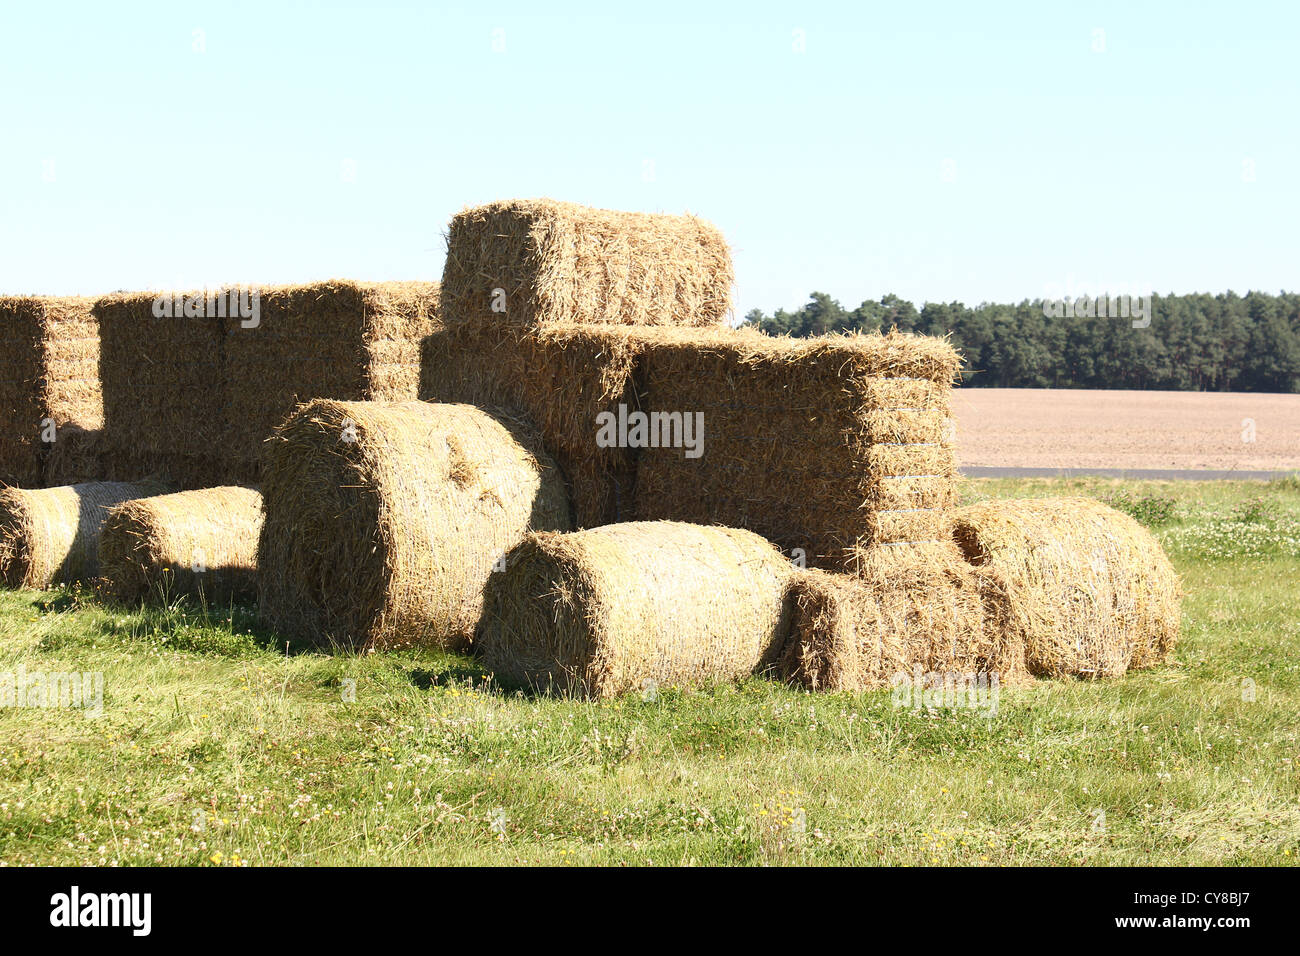 Tractor made of hay bales in a field on the edge Stock Photo - Alamy